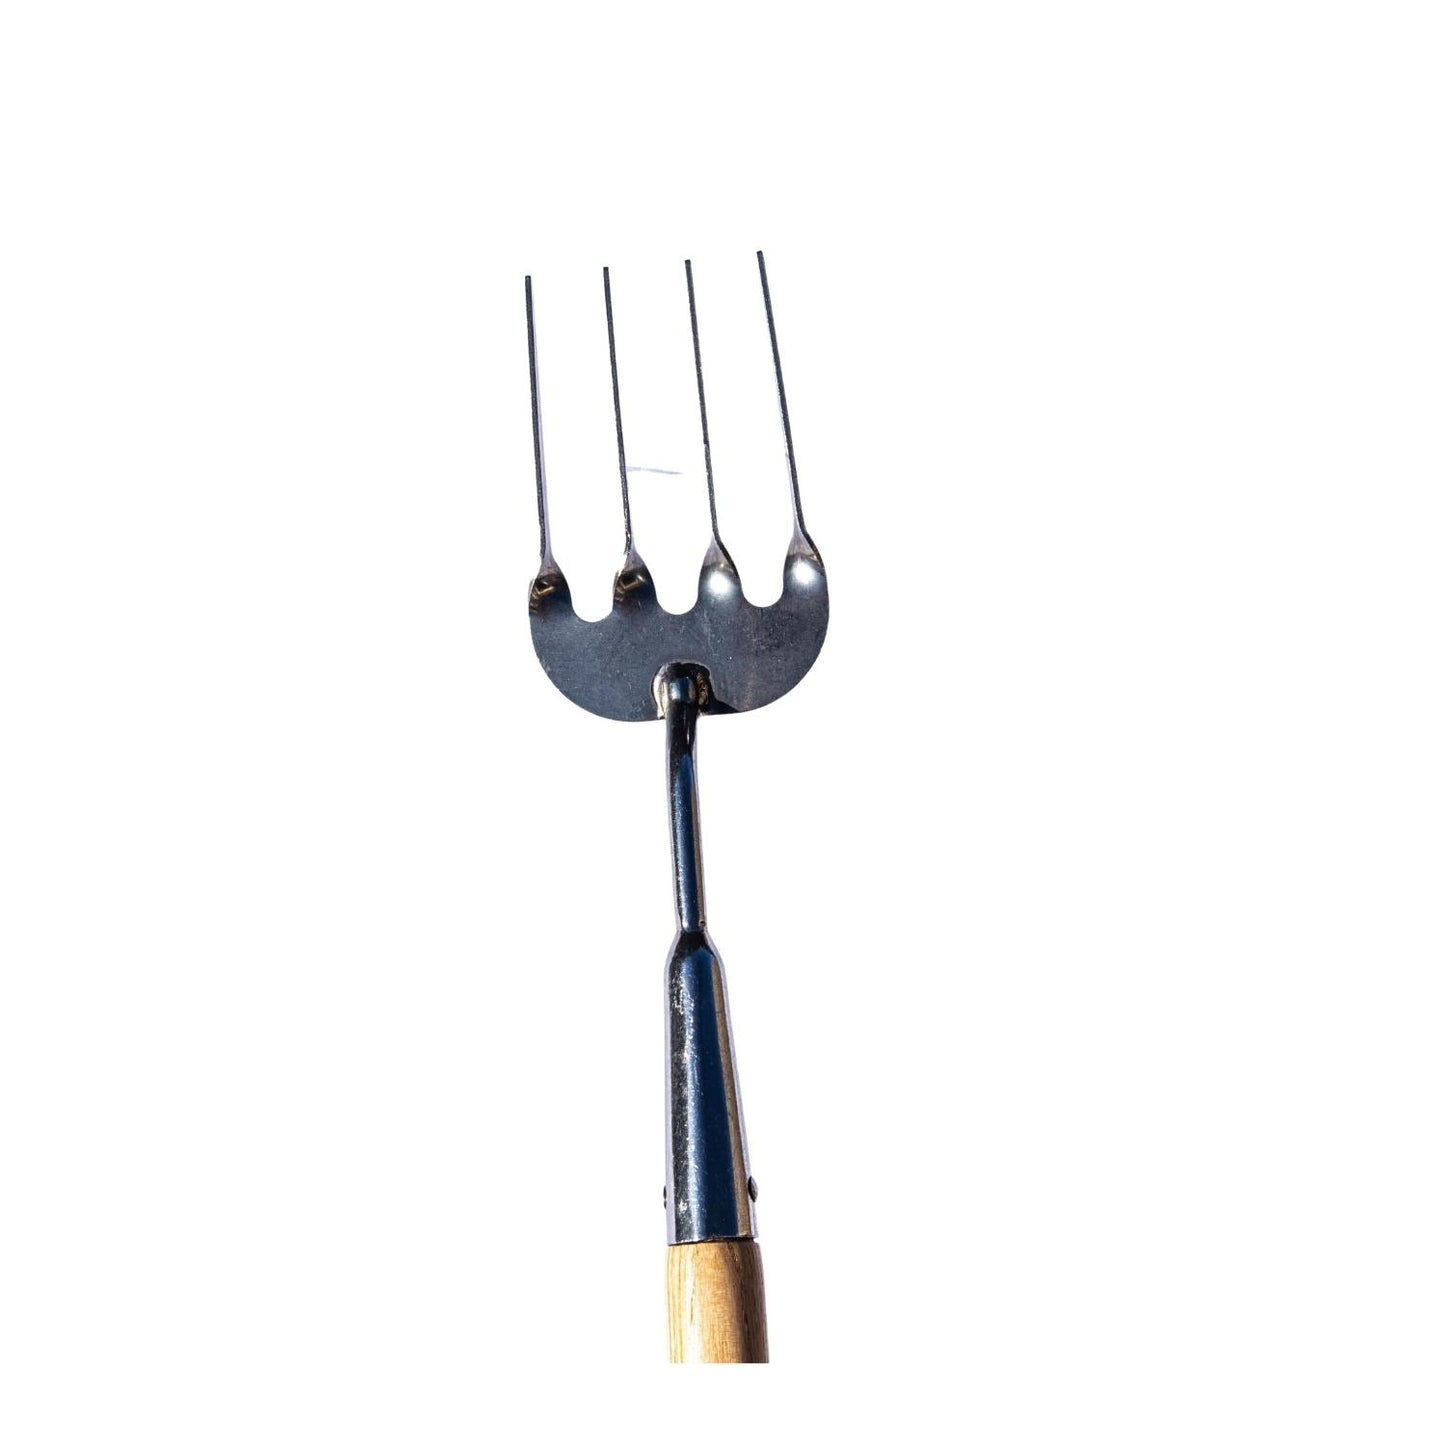 STAINLESS STEEL GARDEN FORK WITH LONG ASH HANDLE - SSWFL